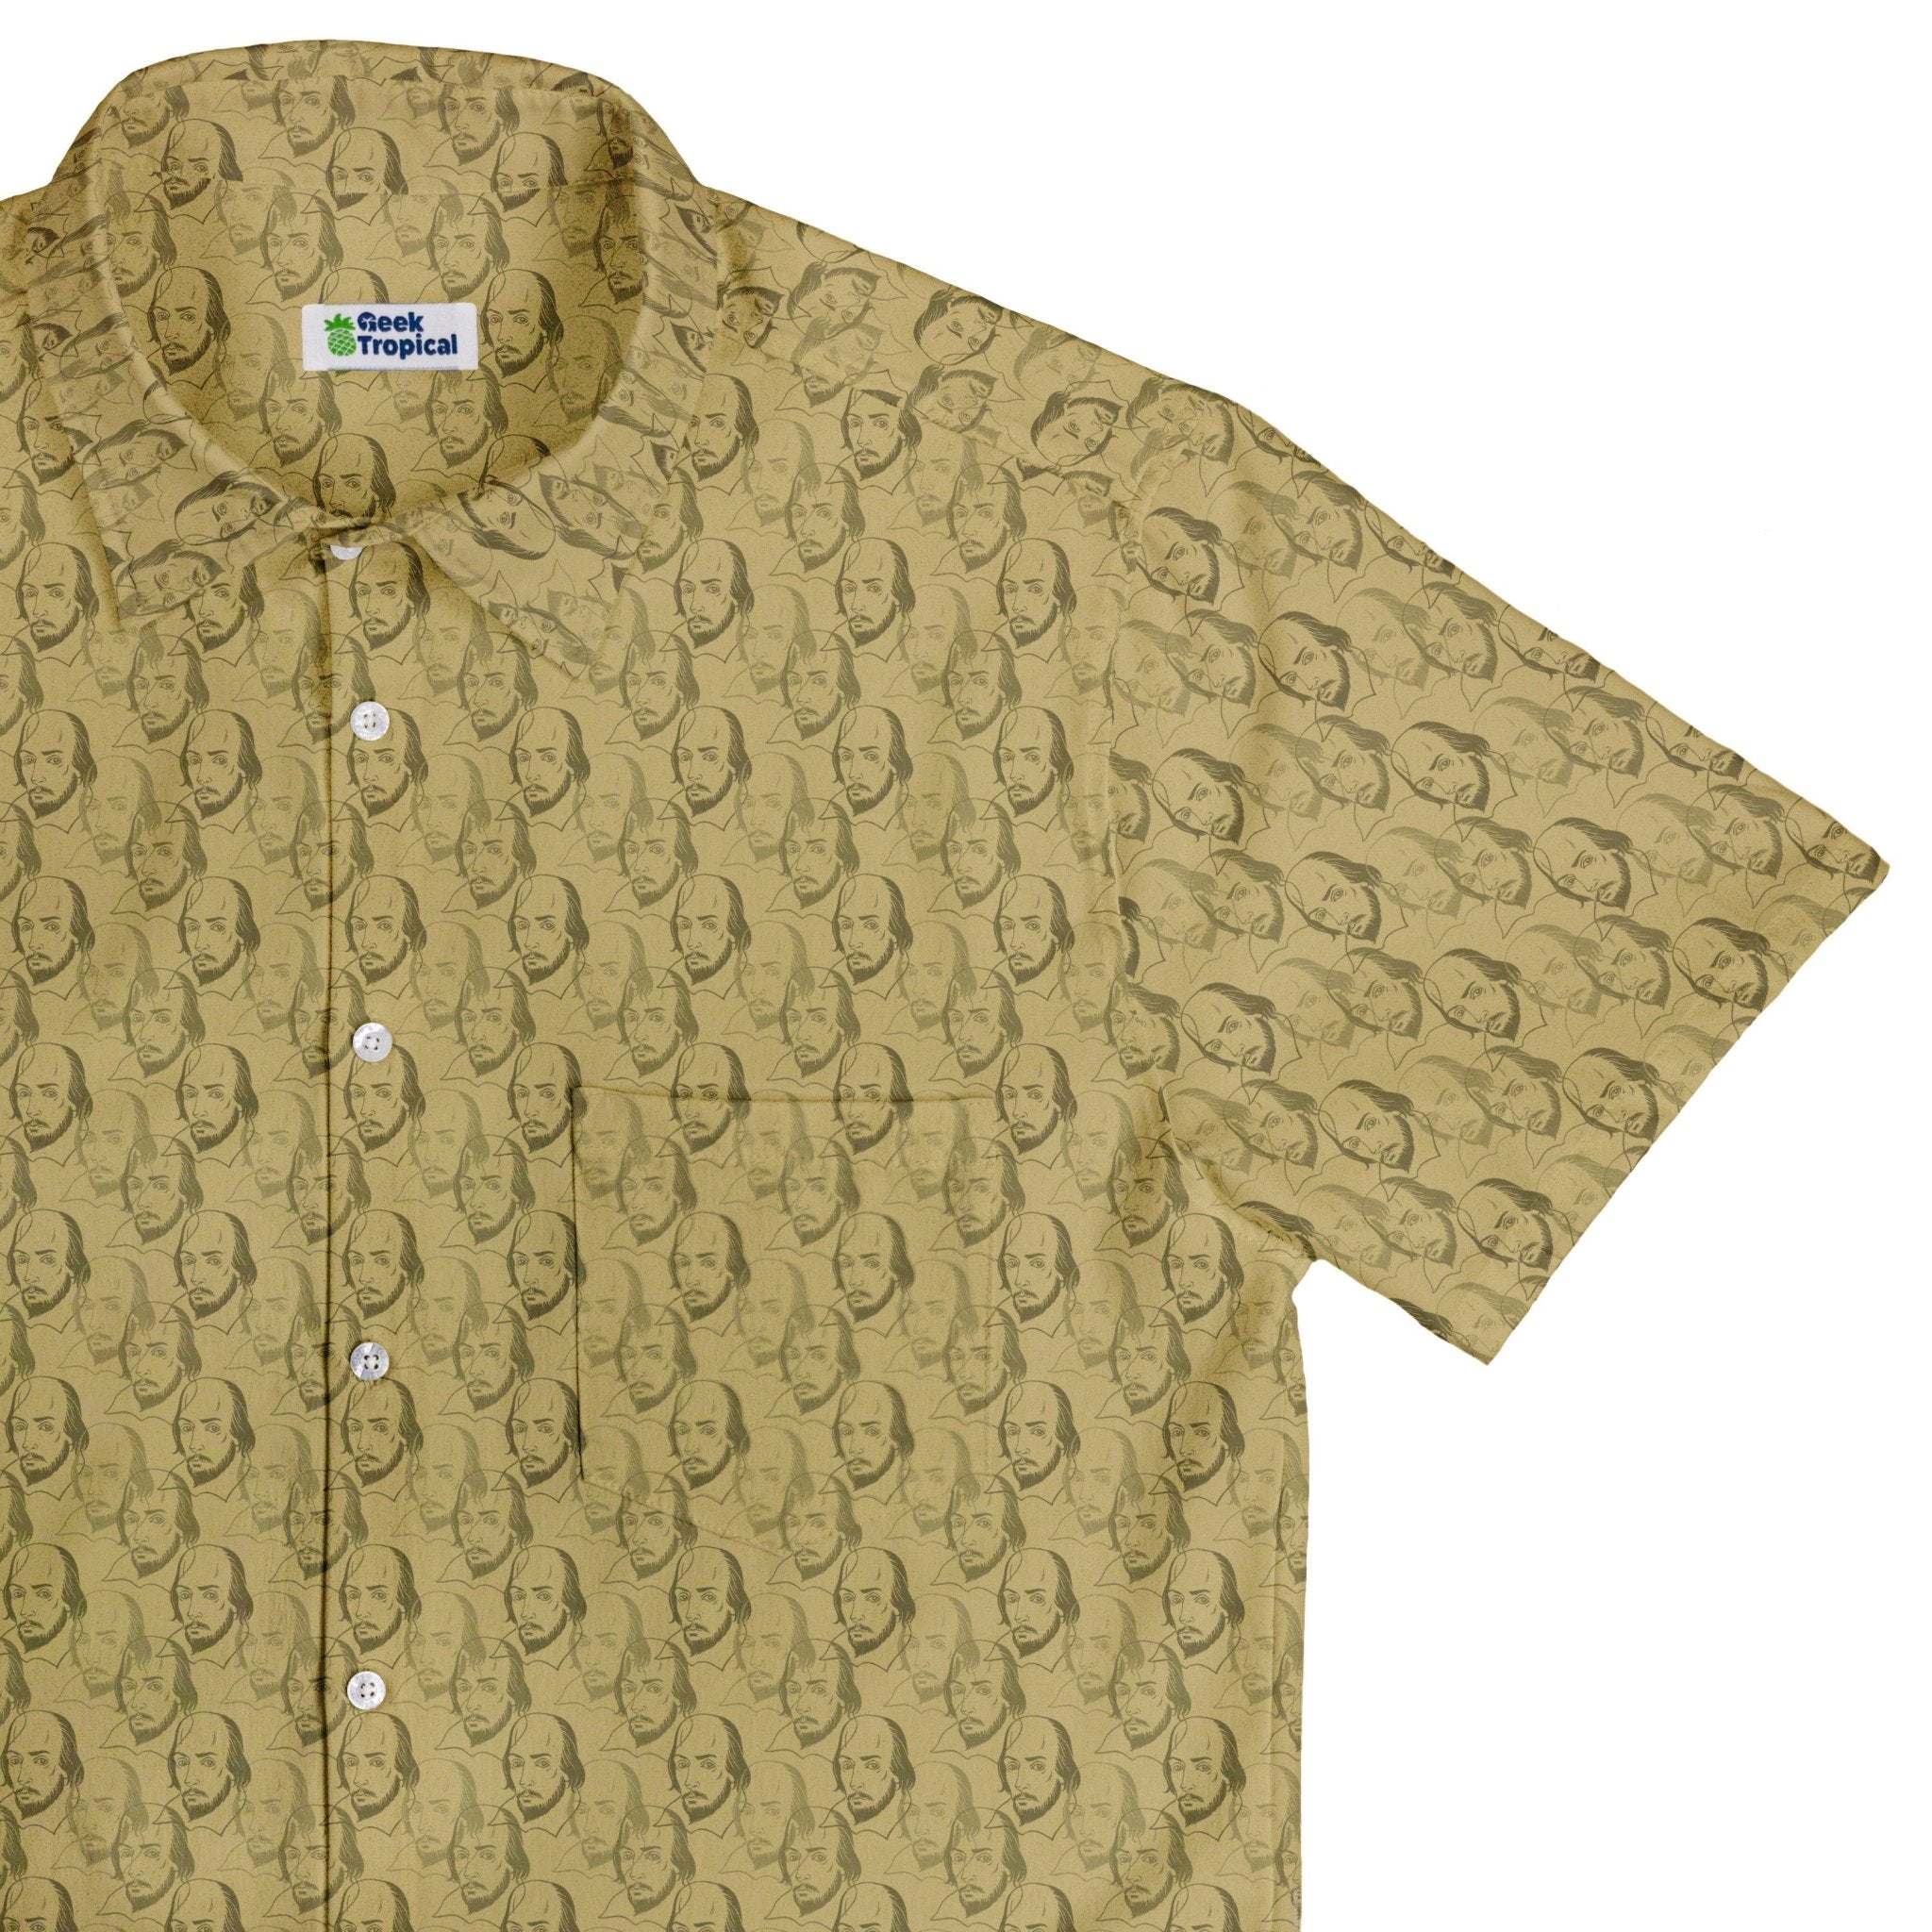 Shakespeare Tan Monochrome Button Up Shirt - adult sizing - Book Prints - Simple Patterns